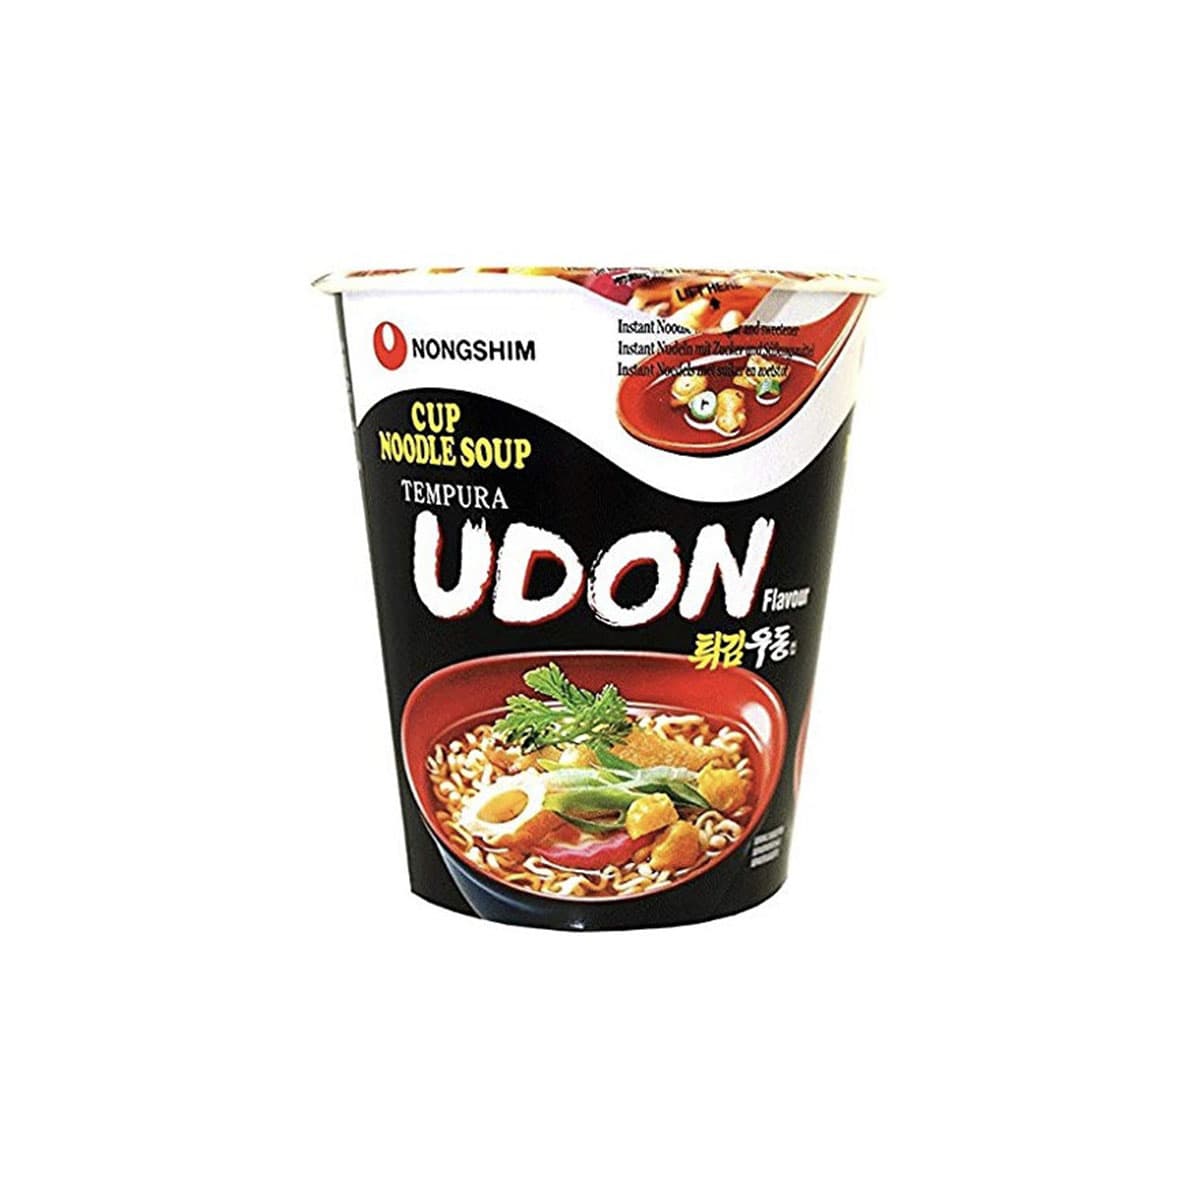 Cup noodles istantanei udon